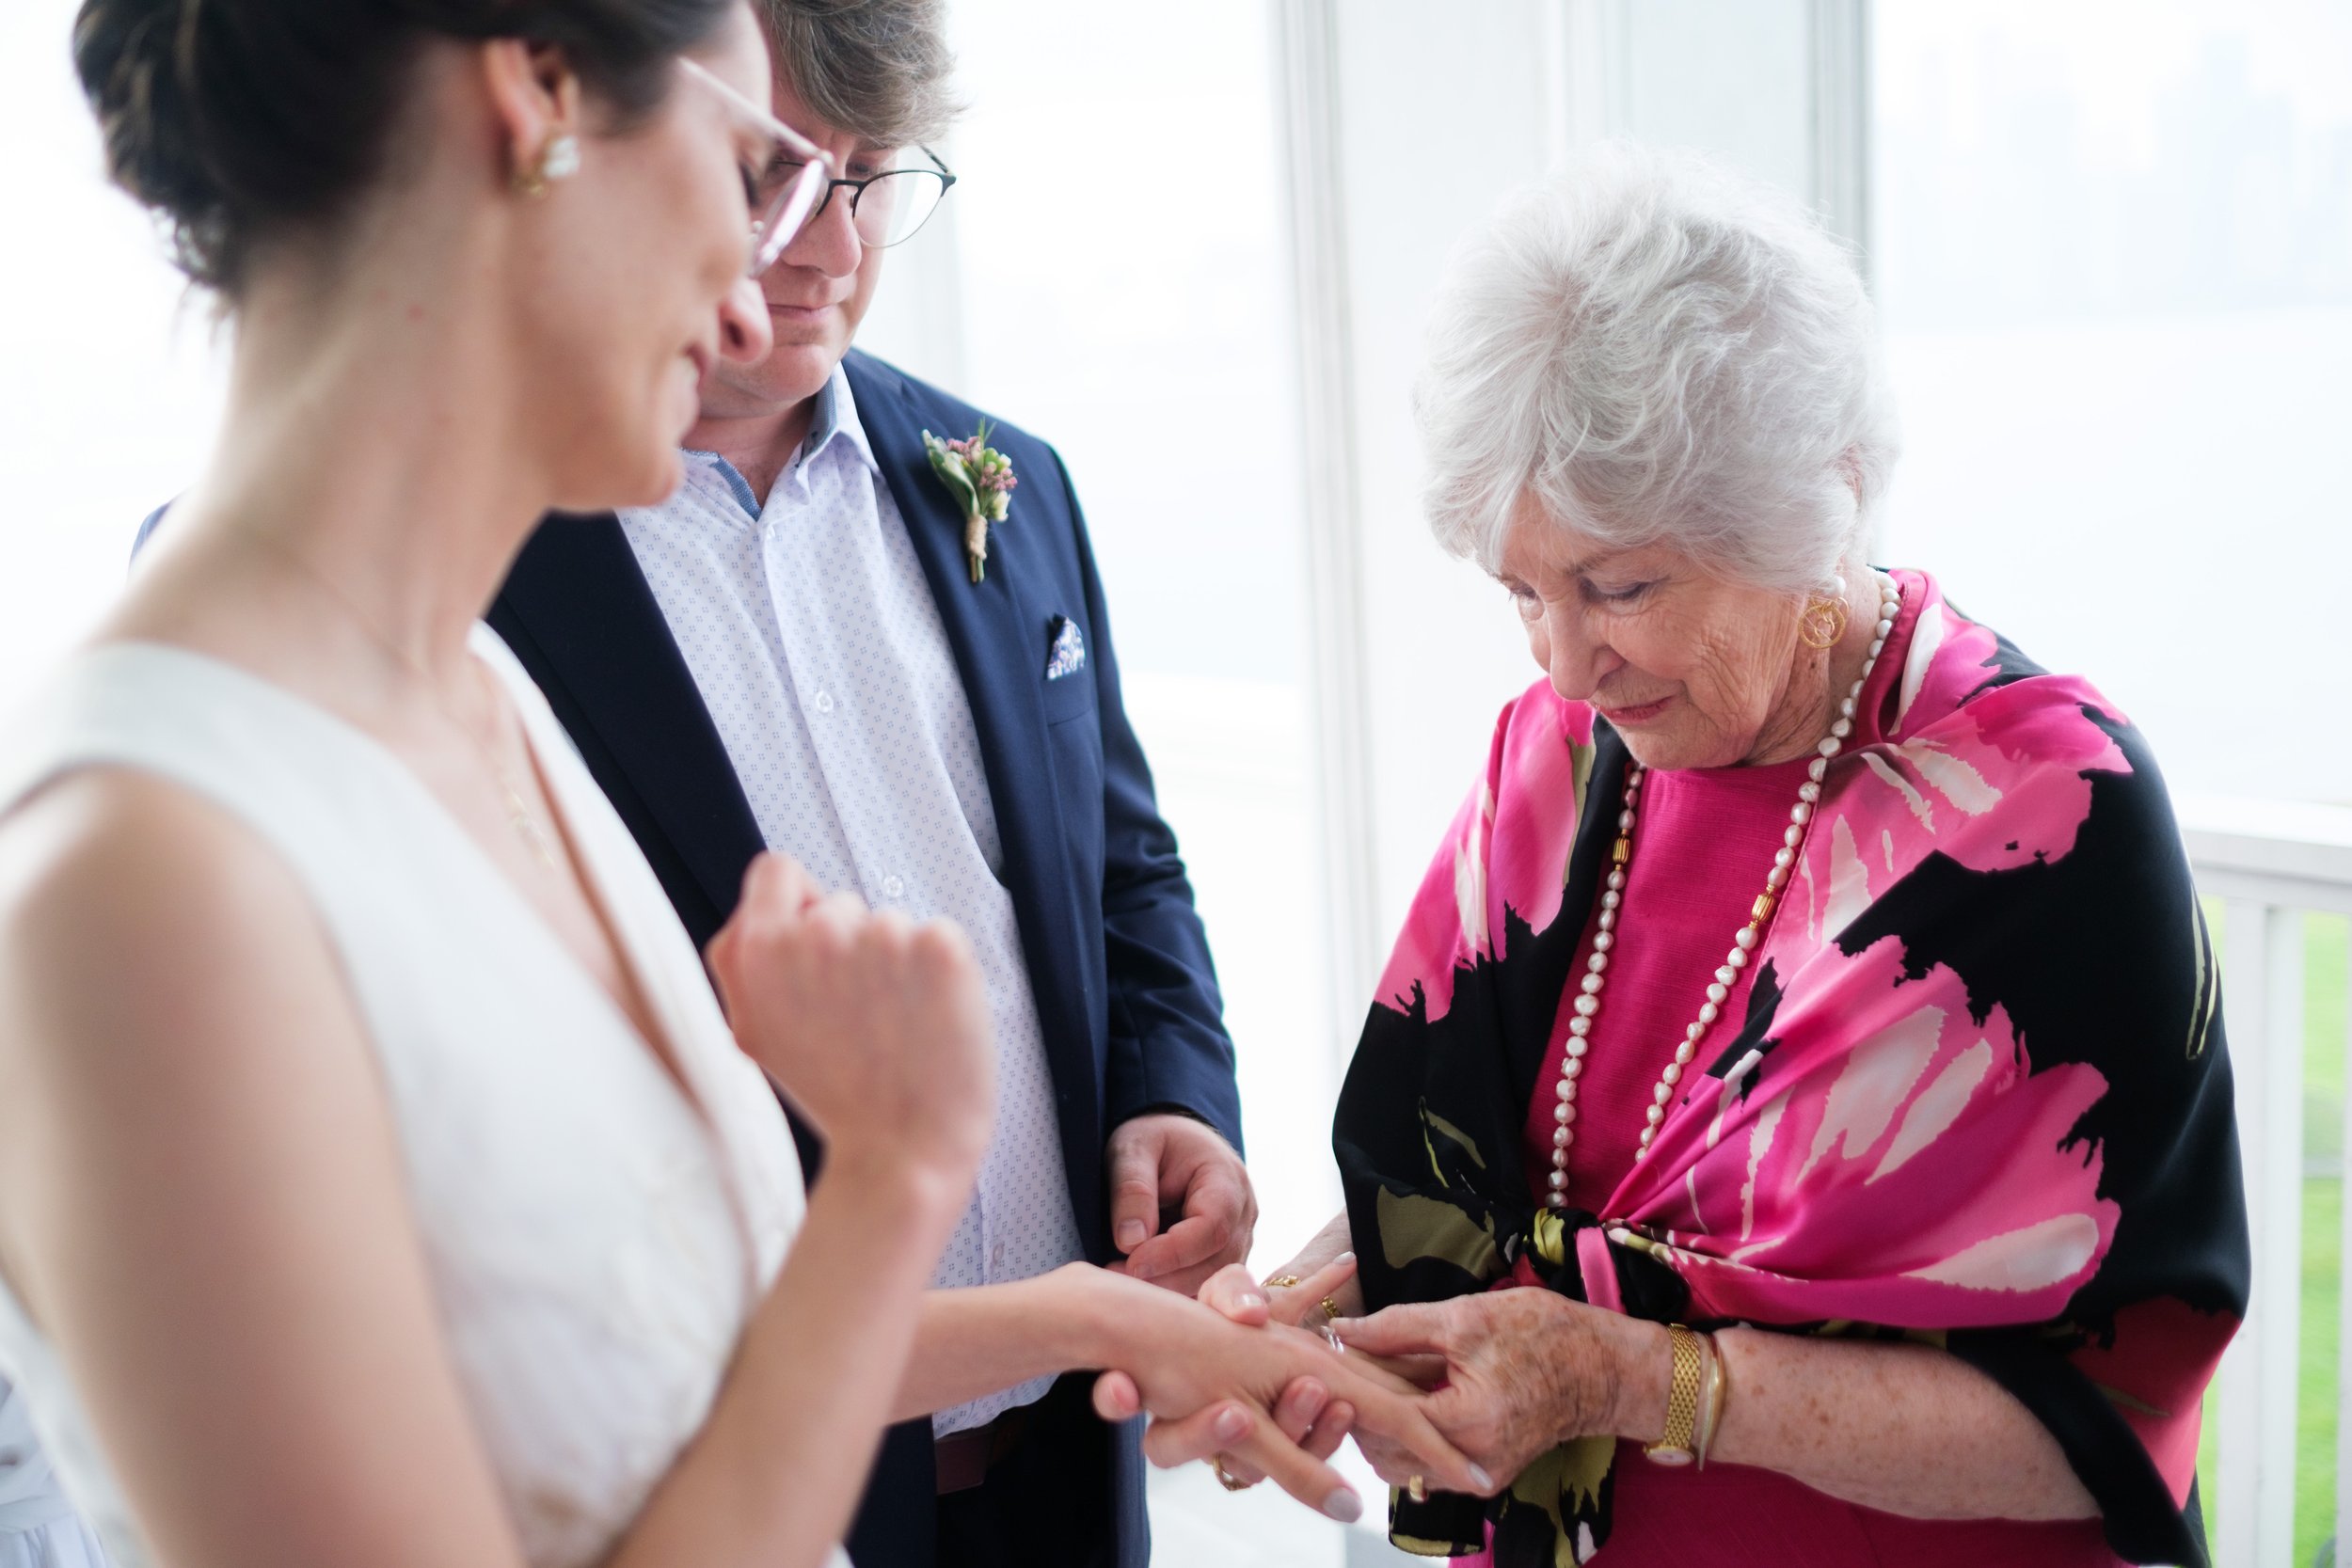  A colour wedding candid photograph of Rocio’s ring being admired by Geoff’s grandmother after their outdoor wedding ceremony at the Royal Canadian Yacht Club by Toronto wedding photographer Scott Williams  